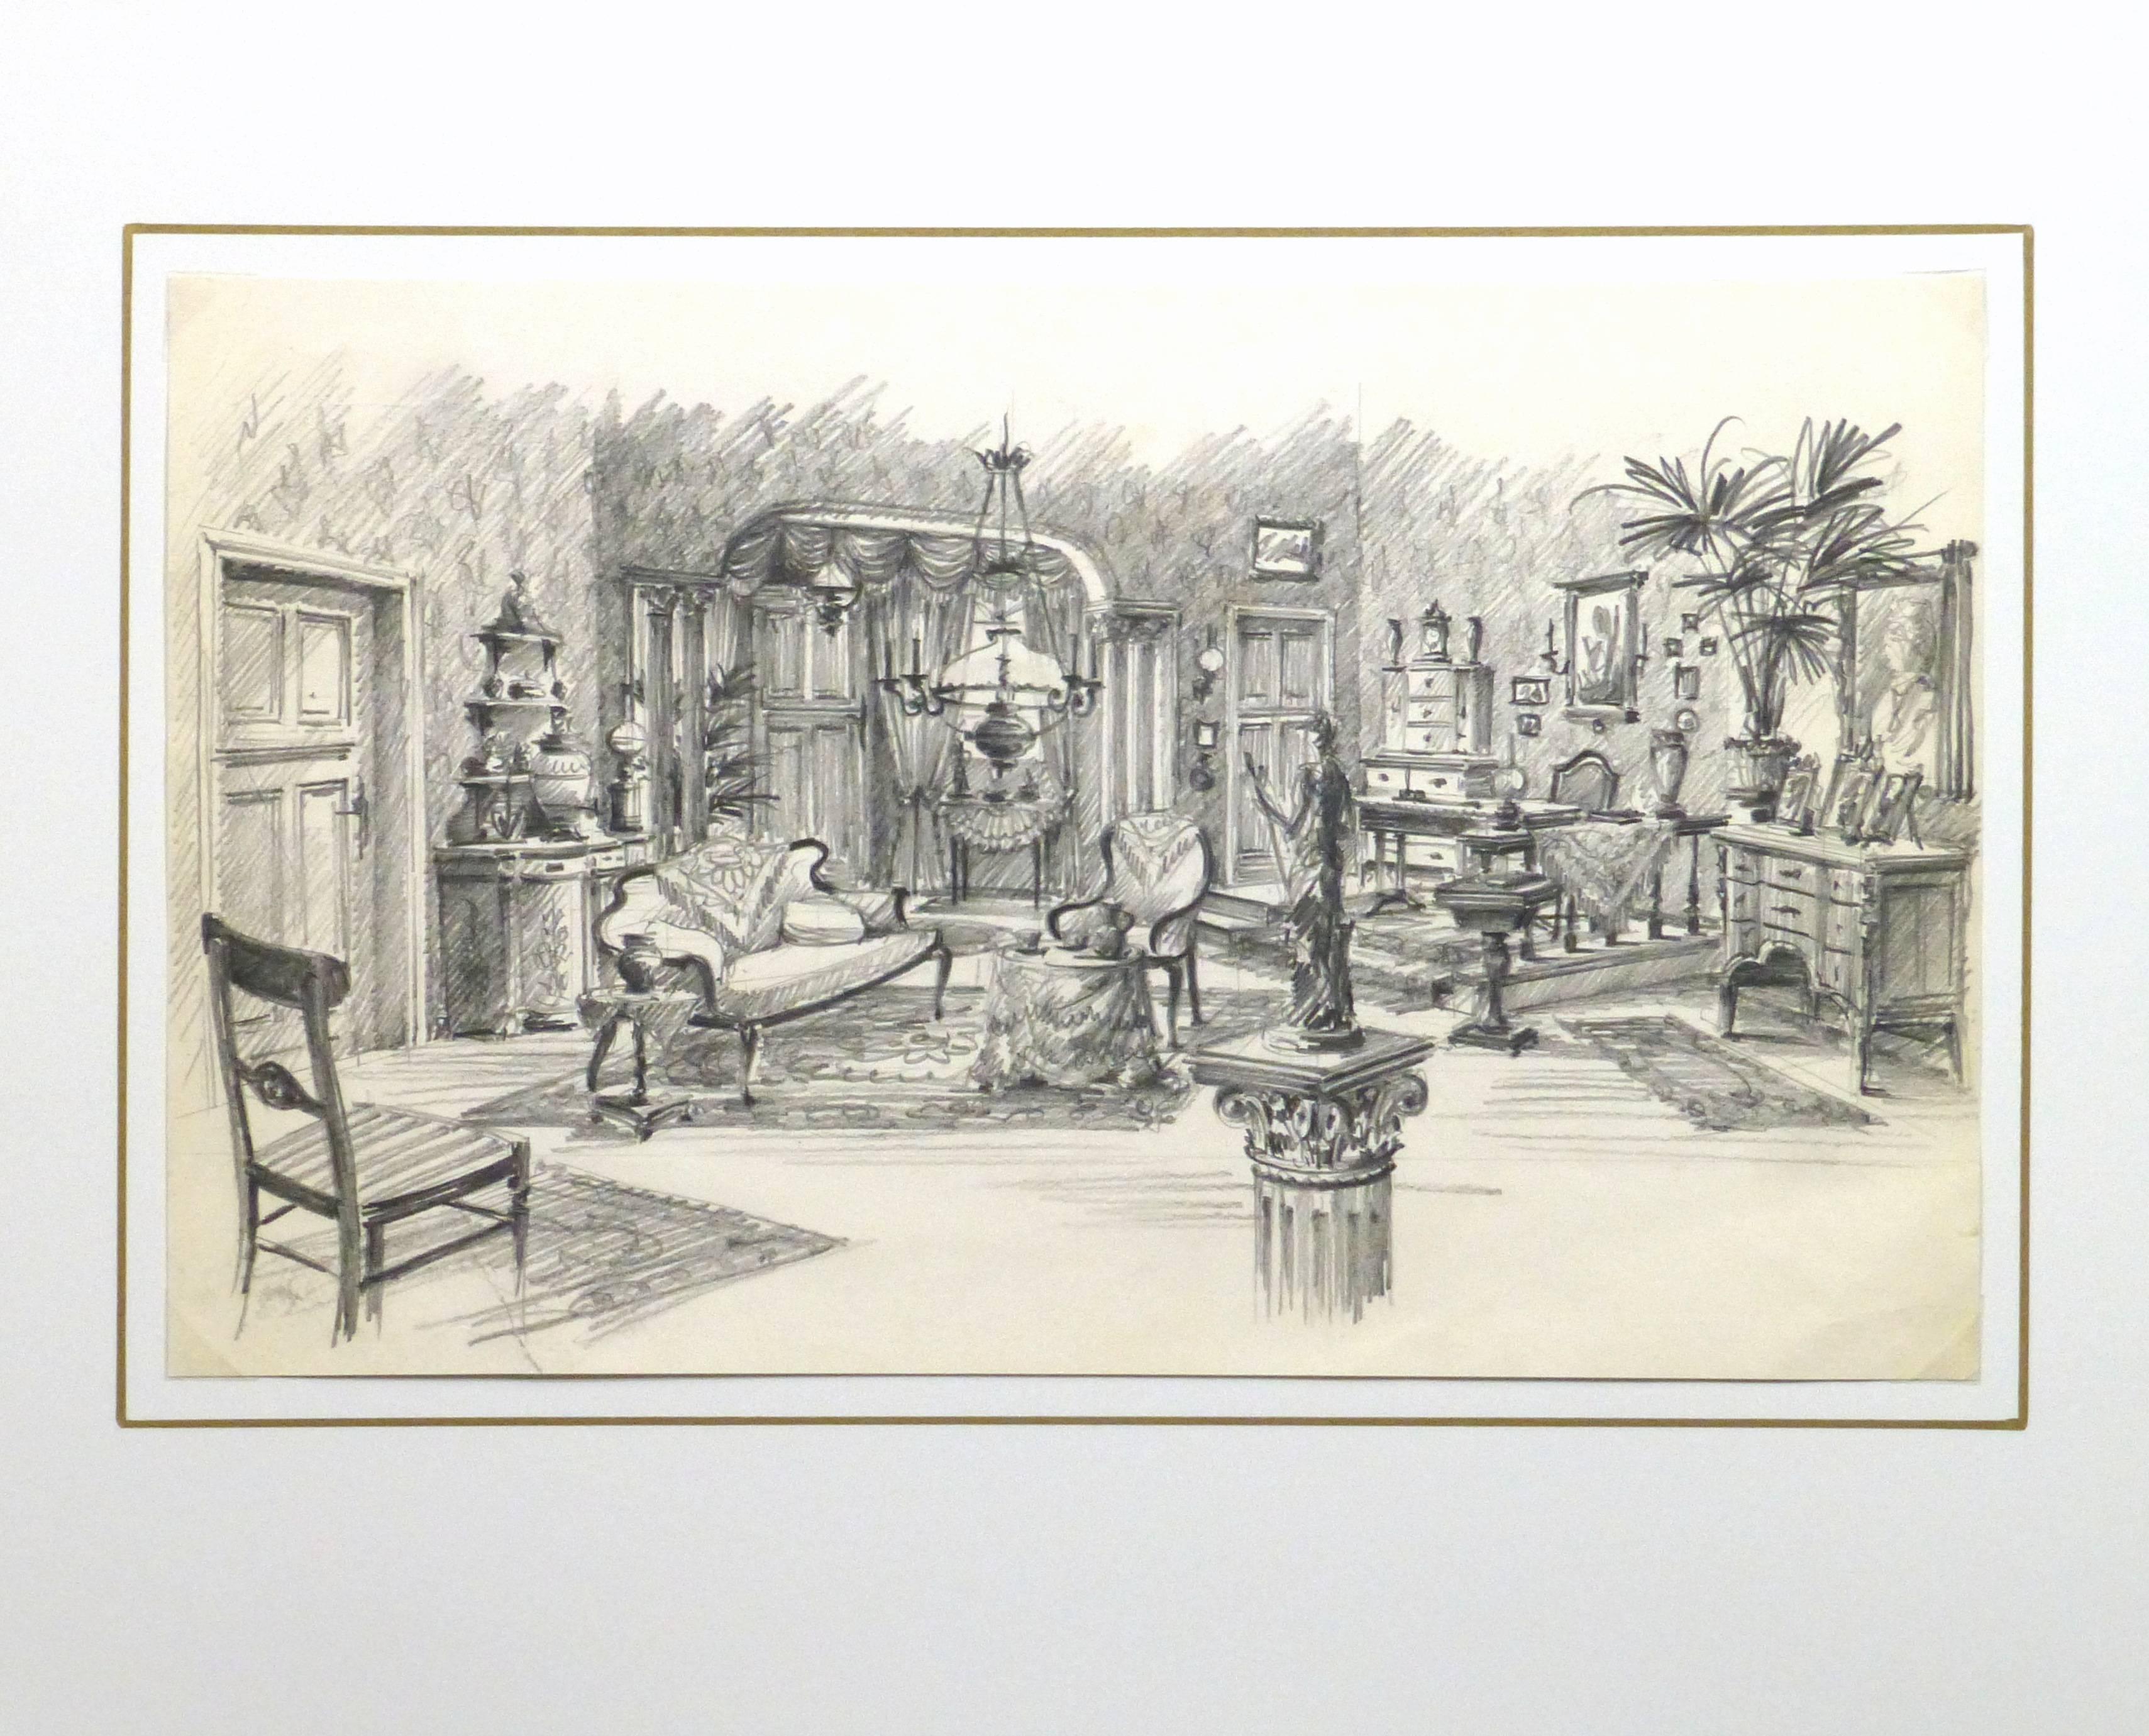 Pencil sketch of a theater set designed to depict an elegant nineteenth century sitting room, circa 1950.

Original artwork on paper displayed on a white mat with a gold border. Archival plastic sleeve and Certificate of Authenticity included.